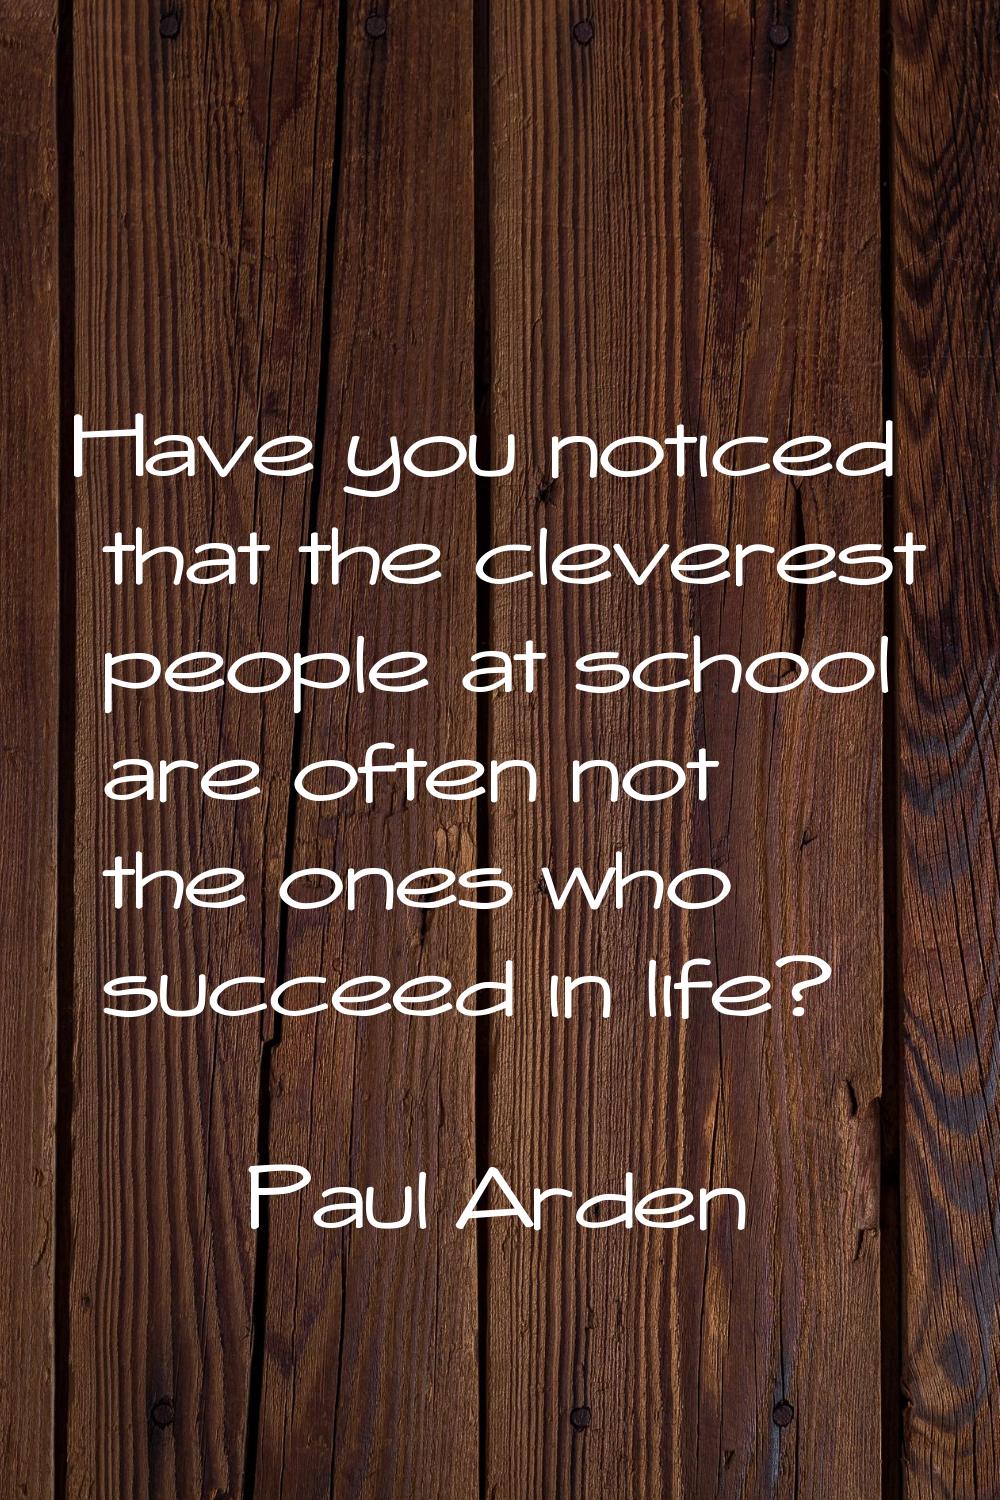 Have you noticed that the cleverest people at school are often not the ones who succeed in life?